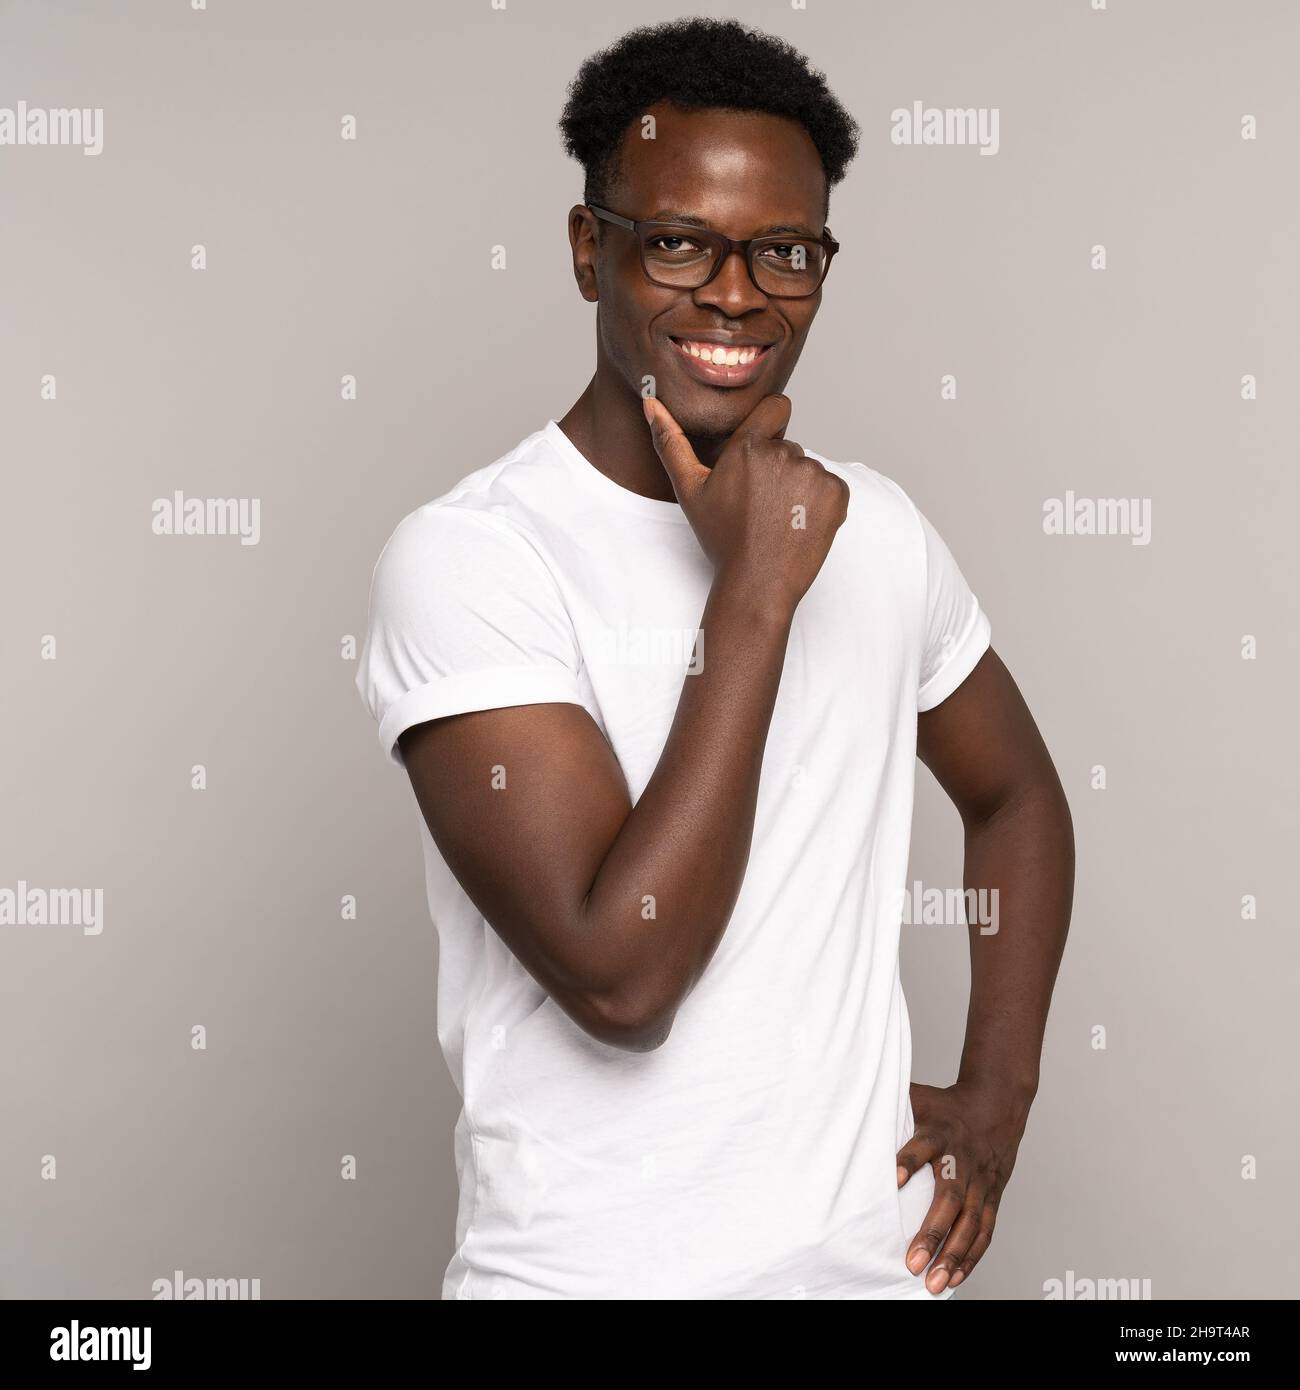 Confident happy african man millennial in white t-shirt with perfect toothy smile wearing eyeglasses Stock Photo